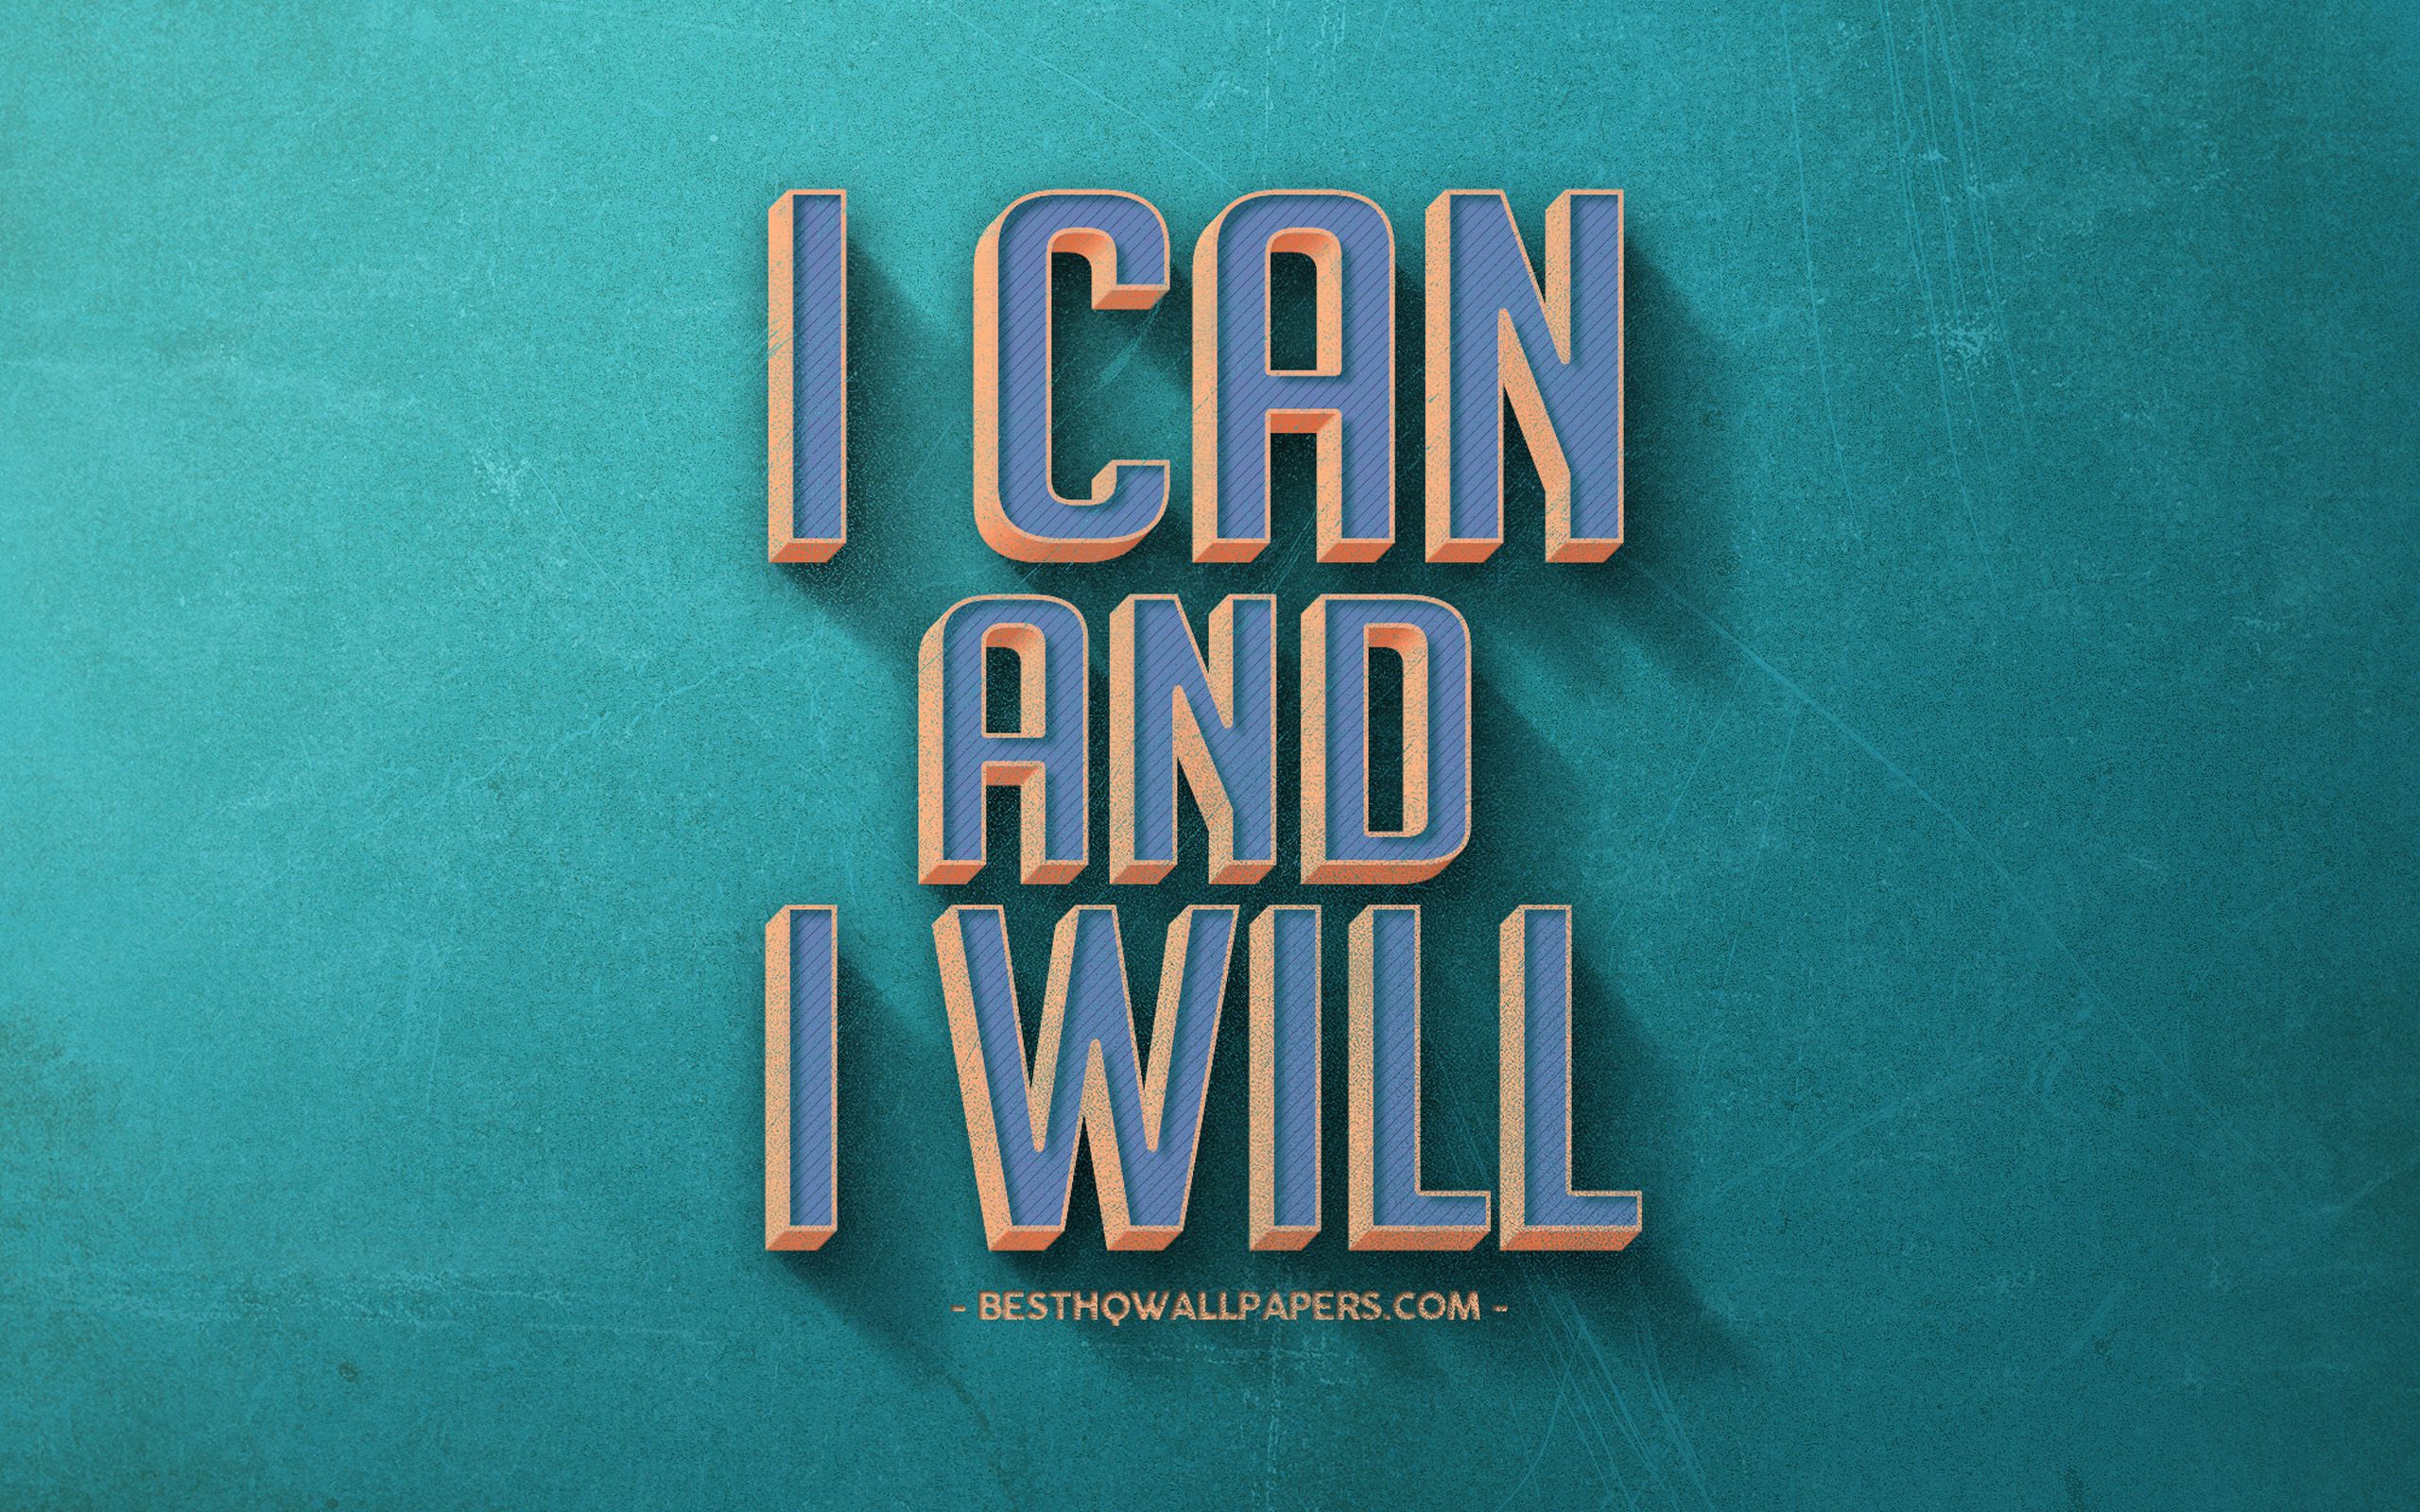 Download wallpaper I can and I will, retro style, motivation quotes, popular short quotes for desktop with resolution 2560x1600. High Quality HD picture wallpaper